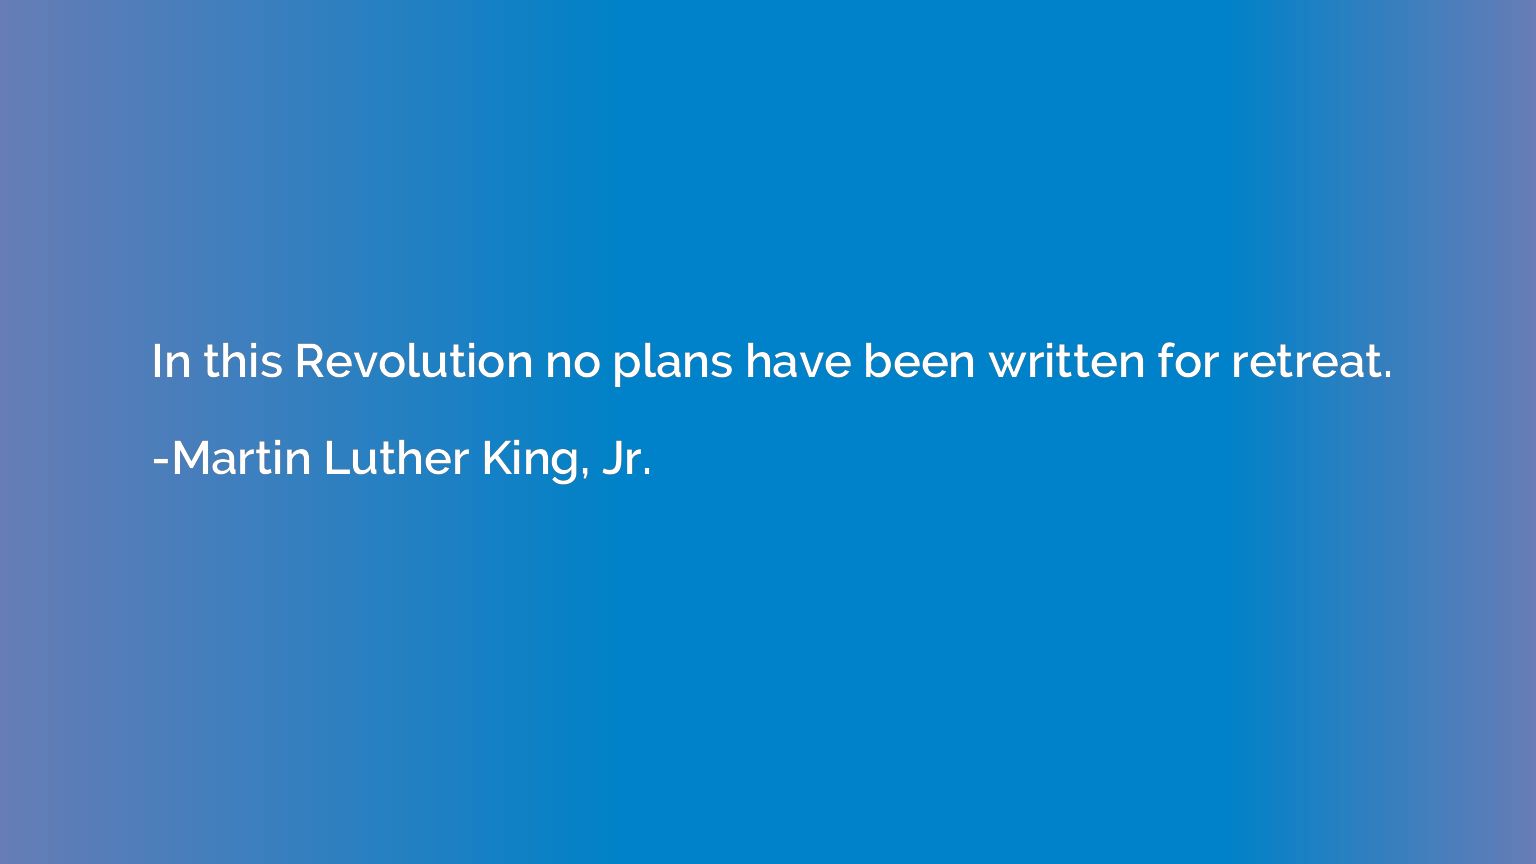 In this Revolution no plans have been written for retreat.